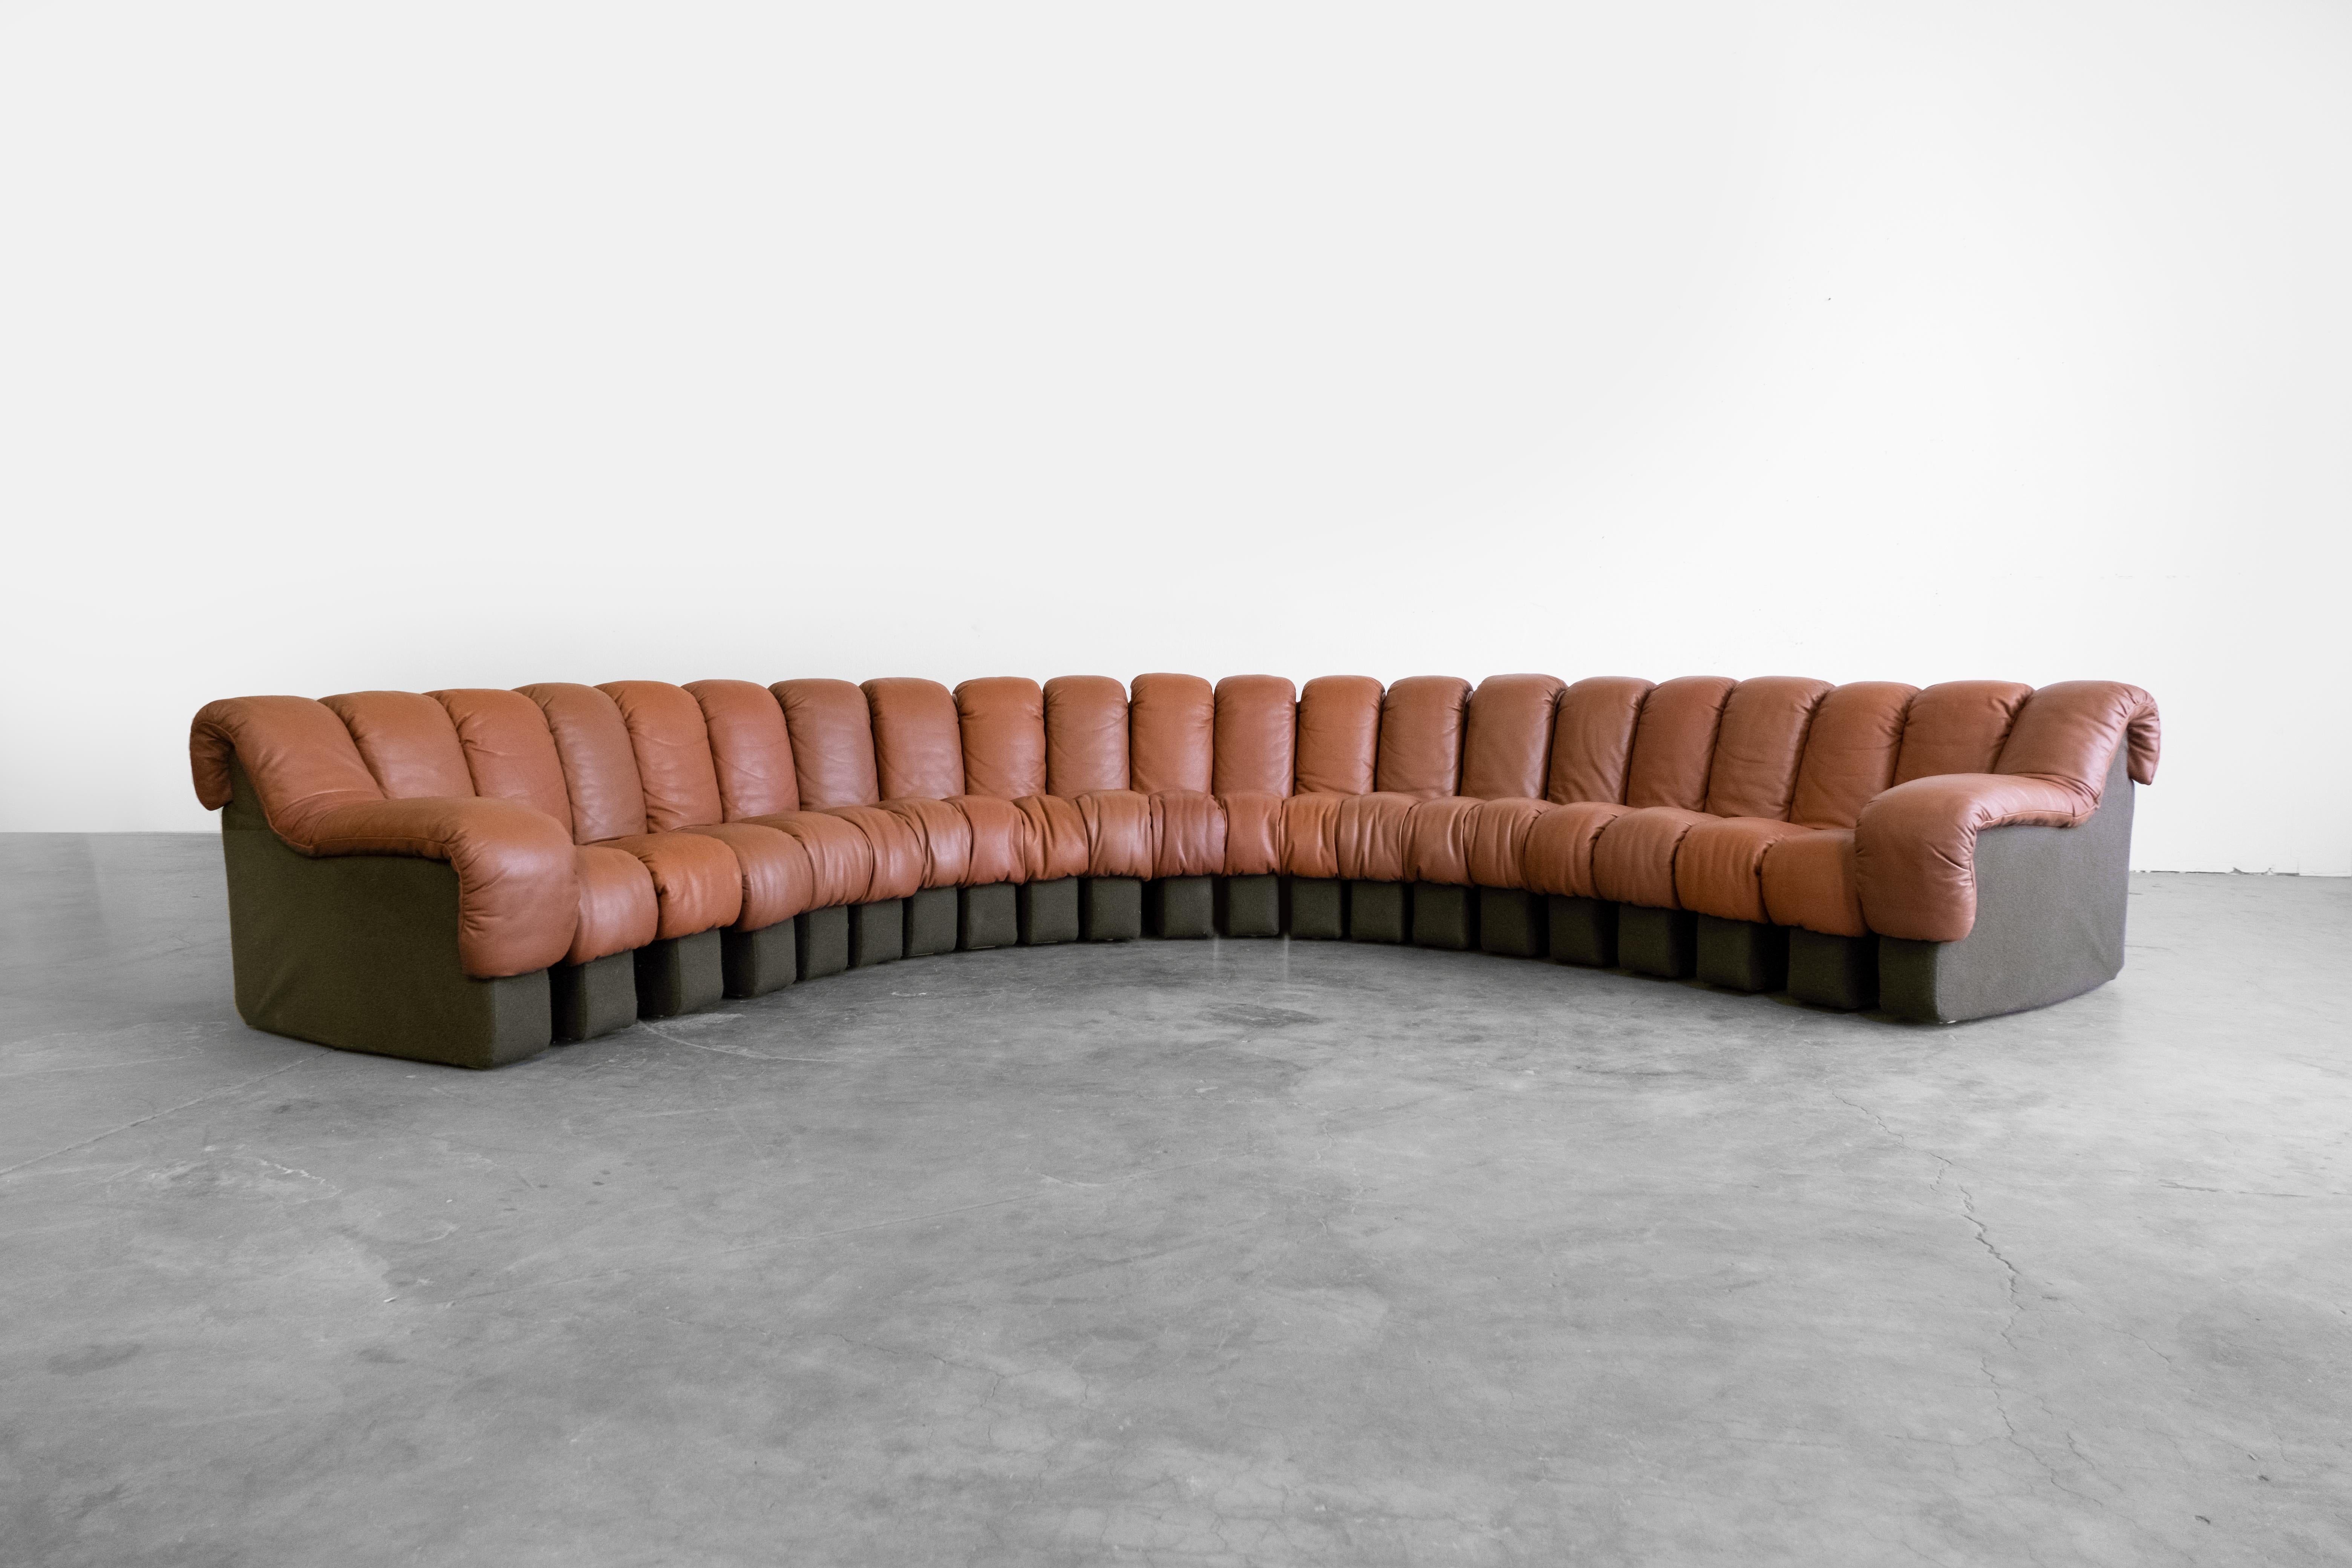 This De Sede DS-600 'Snake' Sofa encompasses 21 individual zipping and locking segments including 2 arm pieces. The zip and locking segments allow for numerous shapes and setups. Great vintage condition. 

Designed by Ueli Berger, Elenora